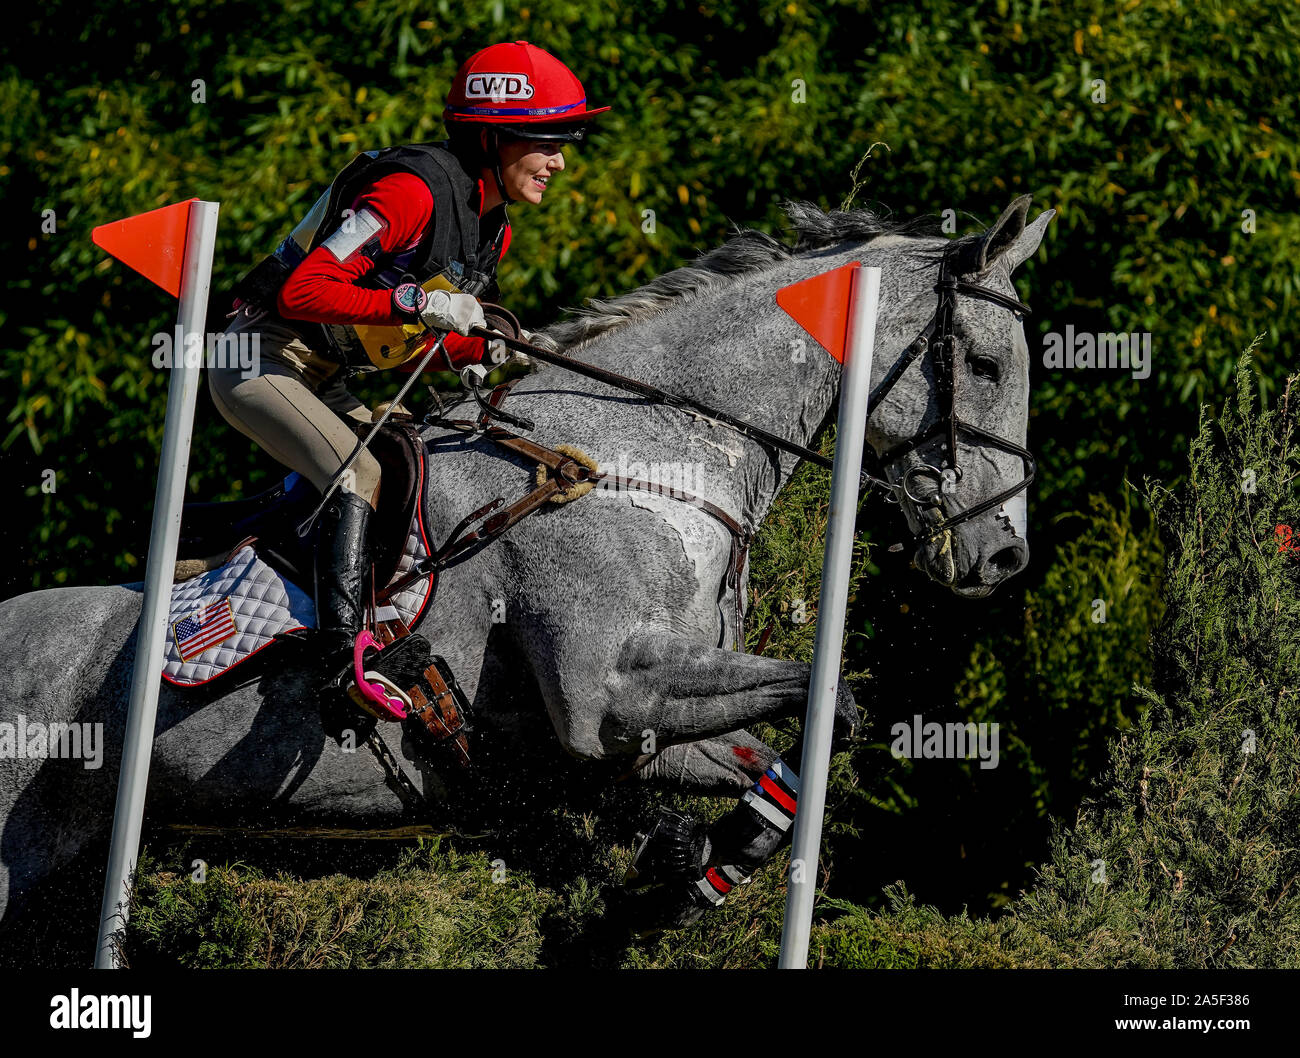 October 19, 2019, Fair Hill, MD, USA: October 20, 2019 : Local rider Juli Sebring (USA), from Elkton, and Welbourne clear an obstacle during the Cross Country Test at the Fair Hill International 3-Day Event at the Fair Hill Natural Resources Area in Fair Hill, Maryland. This is the final year of a 31-year run of the event at this location. In 2020, the event moves to a new facility in the Fair Hill area and will eventually be upgraded to one of two CCI 5* events in the United States. Scott Serio/Eclipse Sportswire/CSM Stock Photo